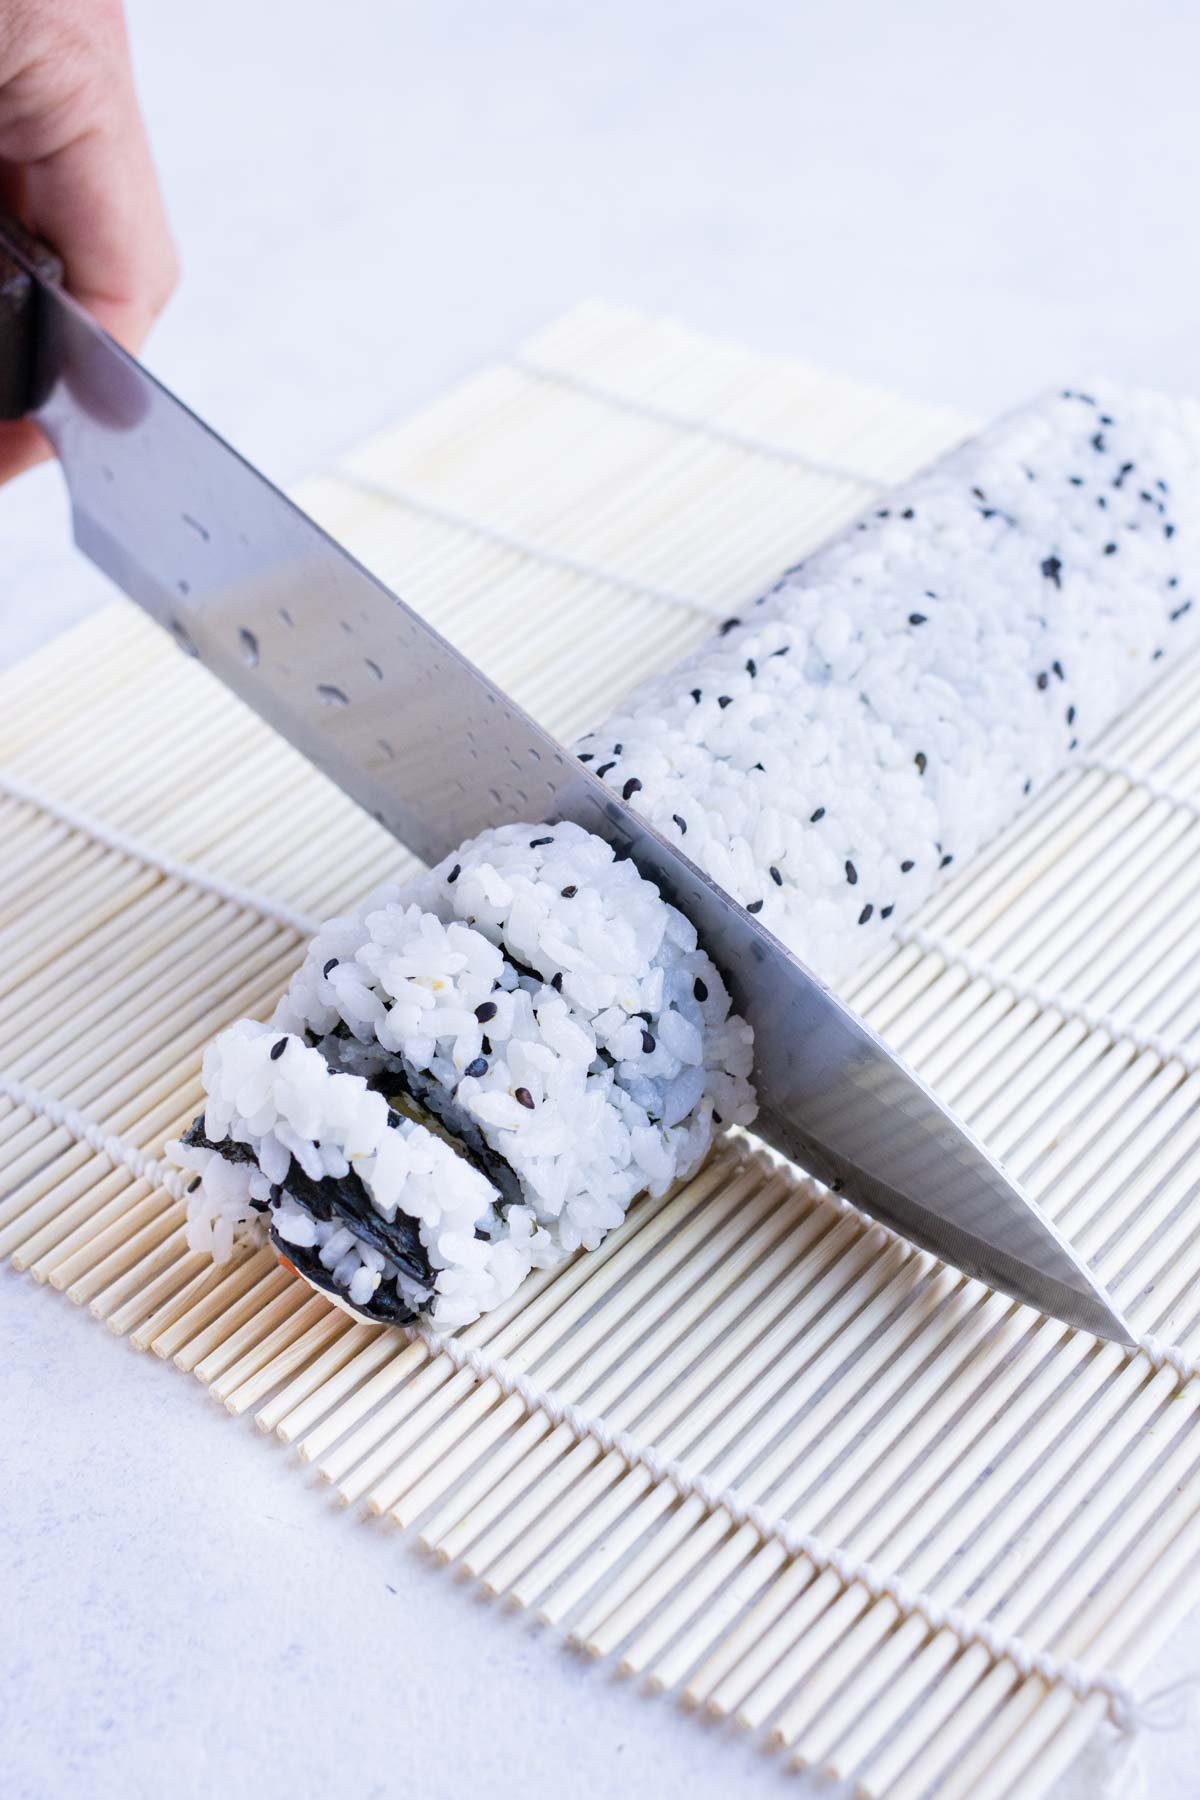 Sushi roll is cut with a wet knife.